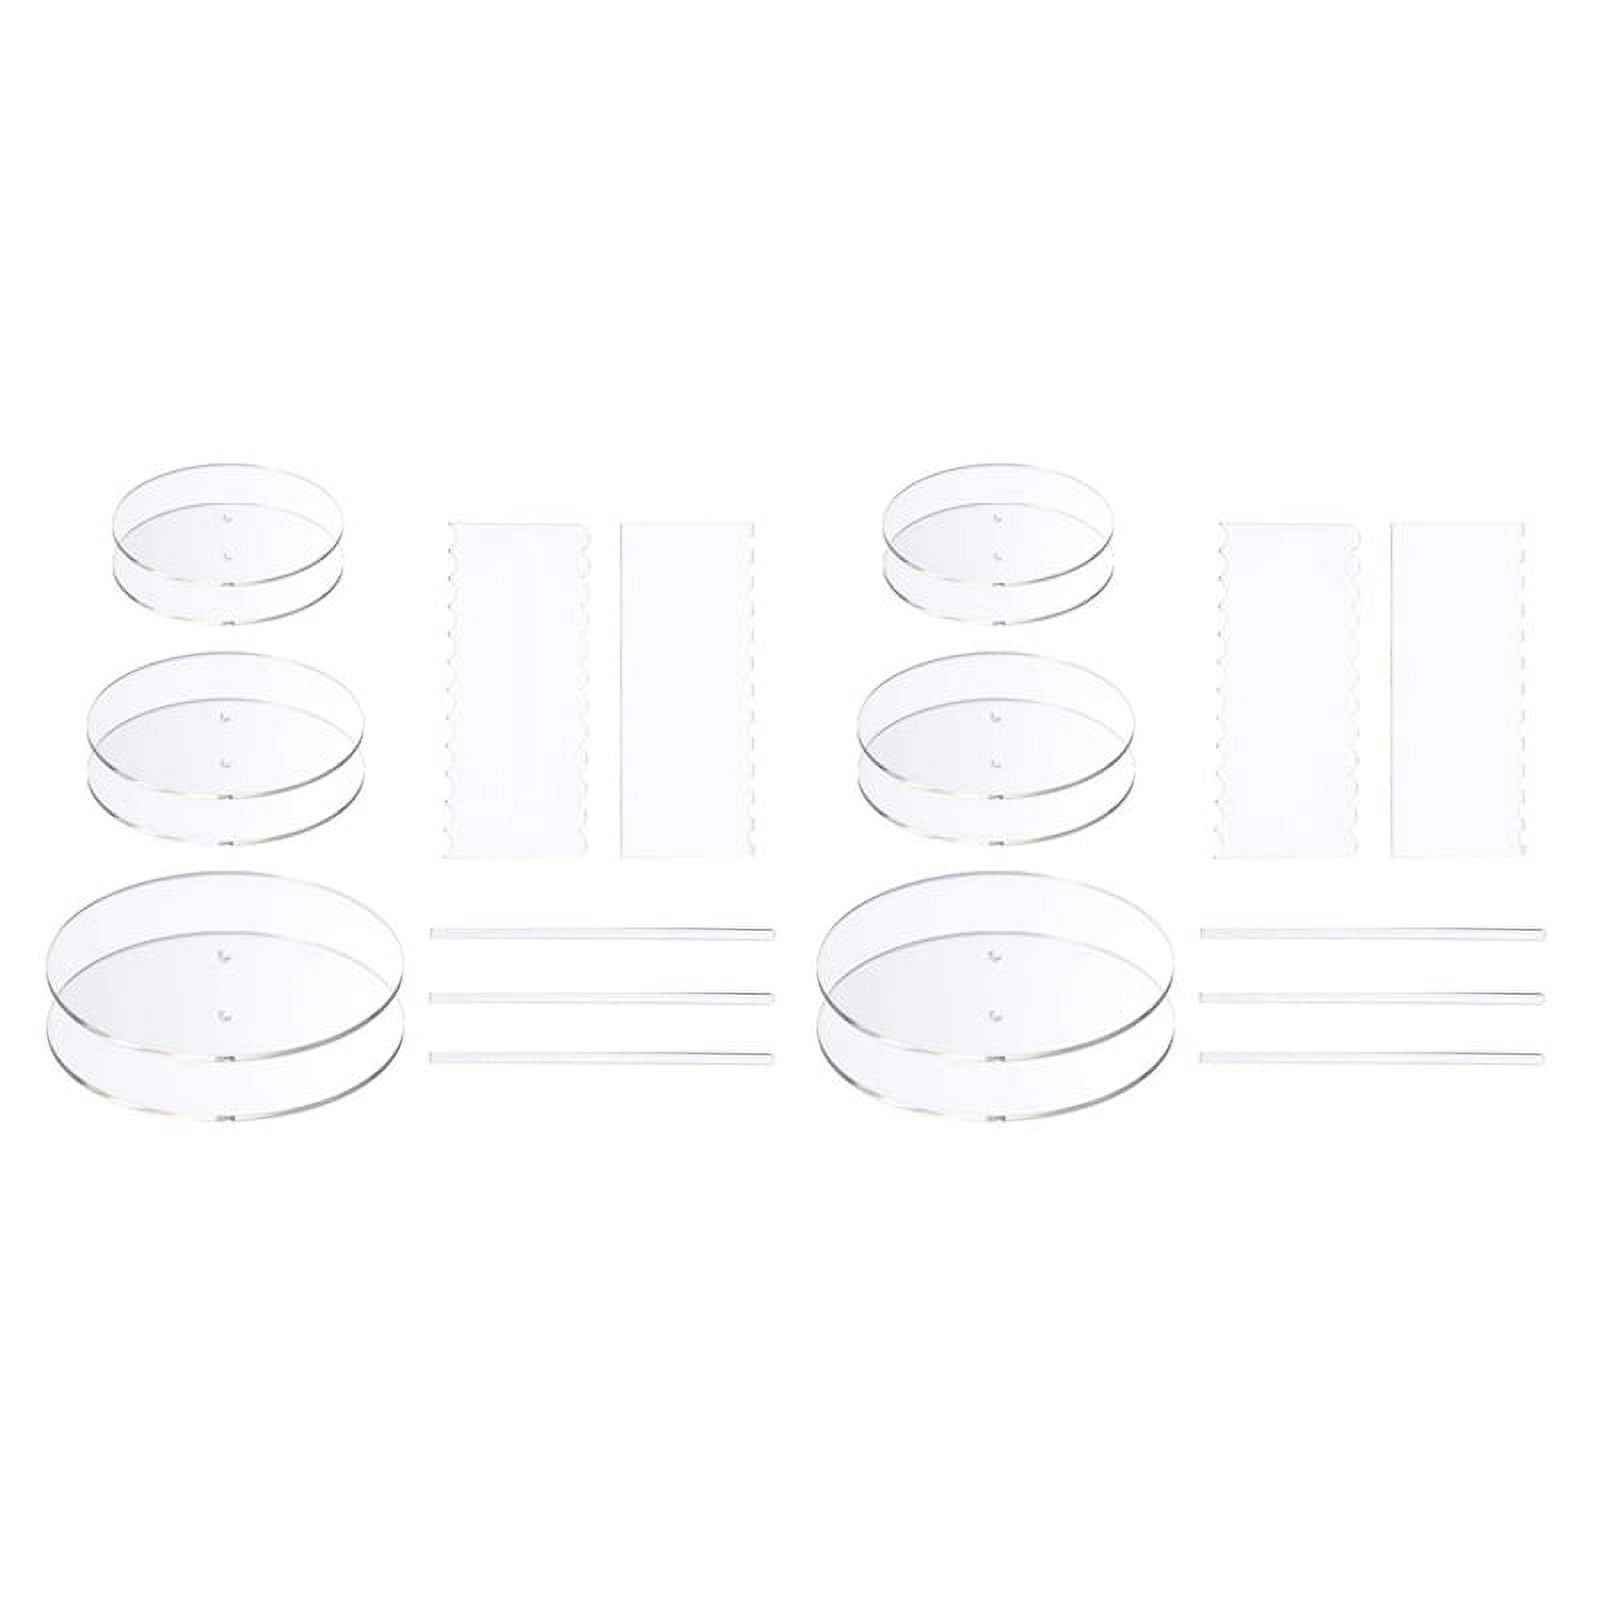 Spec101 Acrylic Cake Disc, 8.25 Inch 2 Pack - Round Acrylic Cake Disc Set,  Acrylic Disk for Cake Decorating, 1/8in Thick